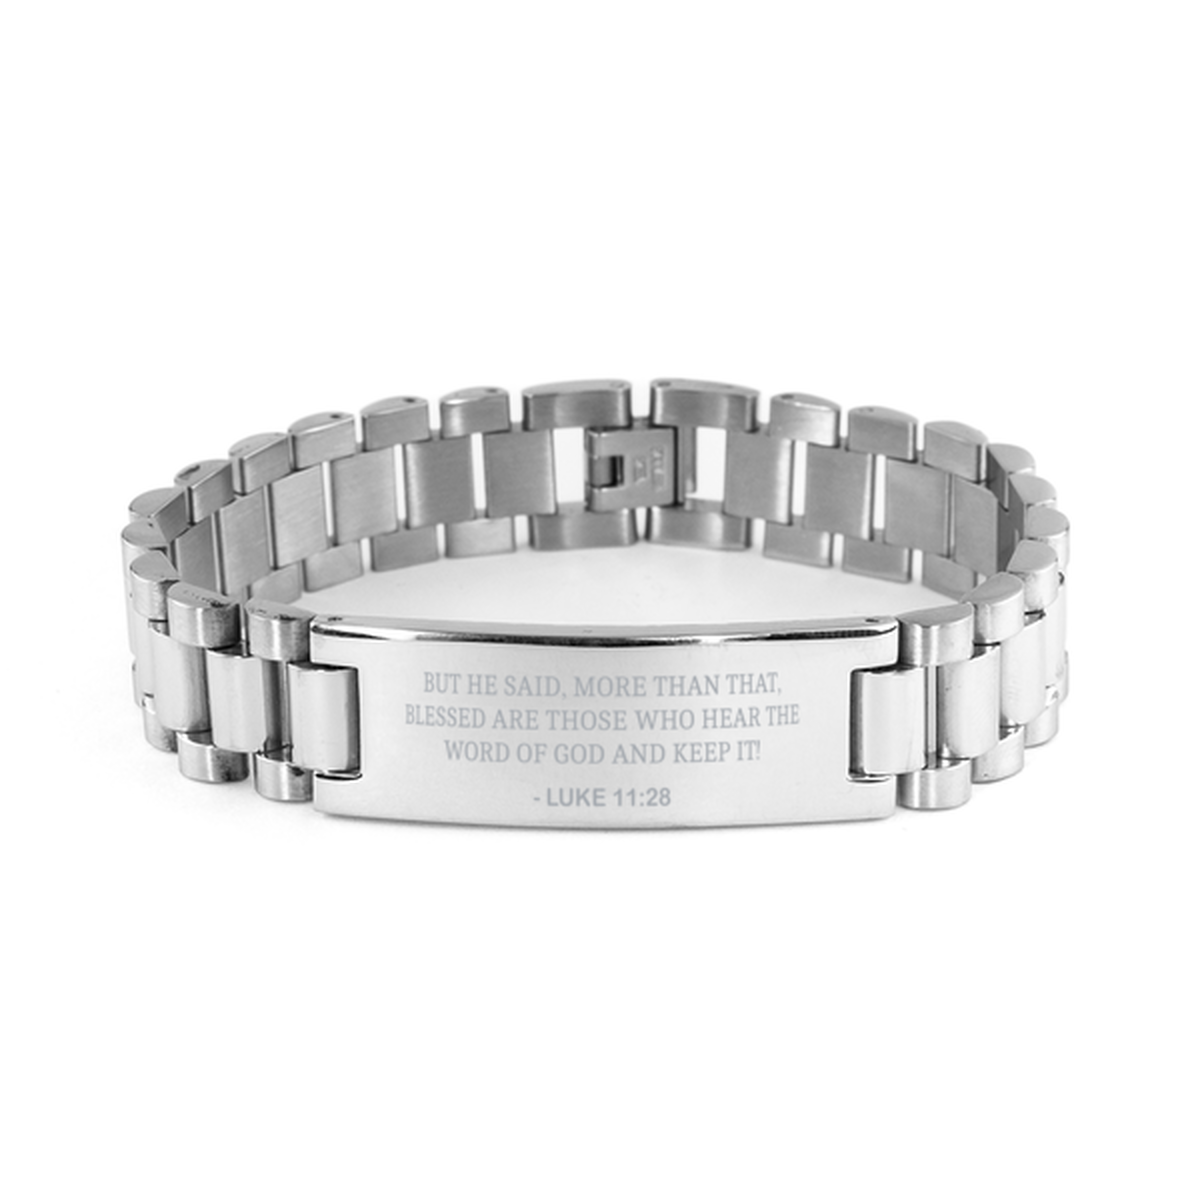 Christian Ladder Stainless Steel Bracelet, Luke 11:28 But He Said, More Than That, Blessed Are Those, Motivational Bible Verse Gifts For Men Women